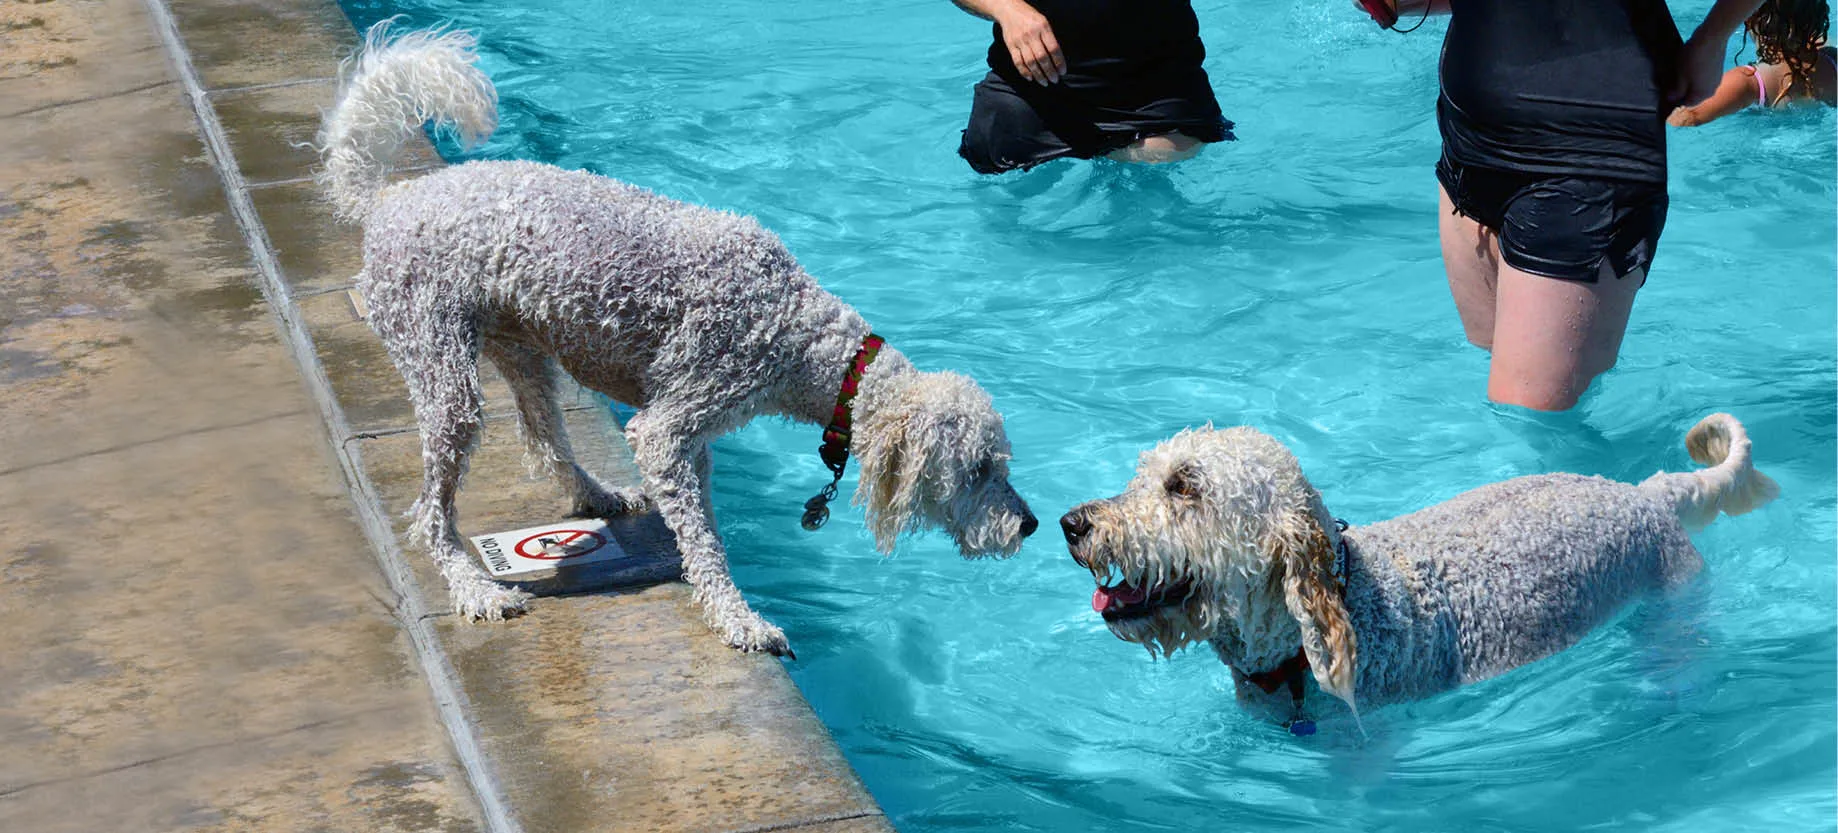 Is your dog comfortable in water